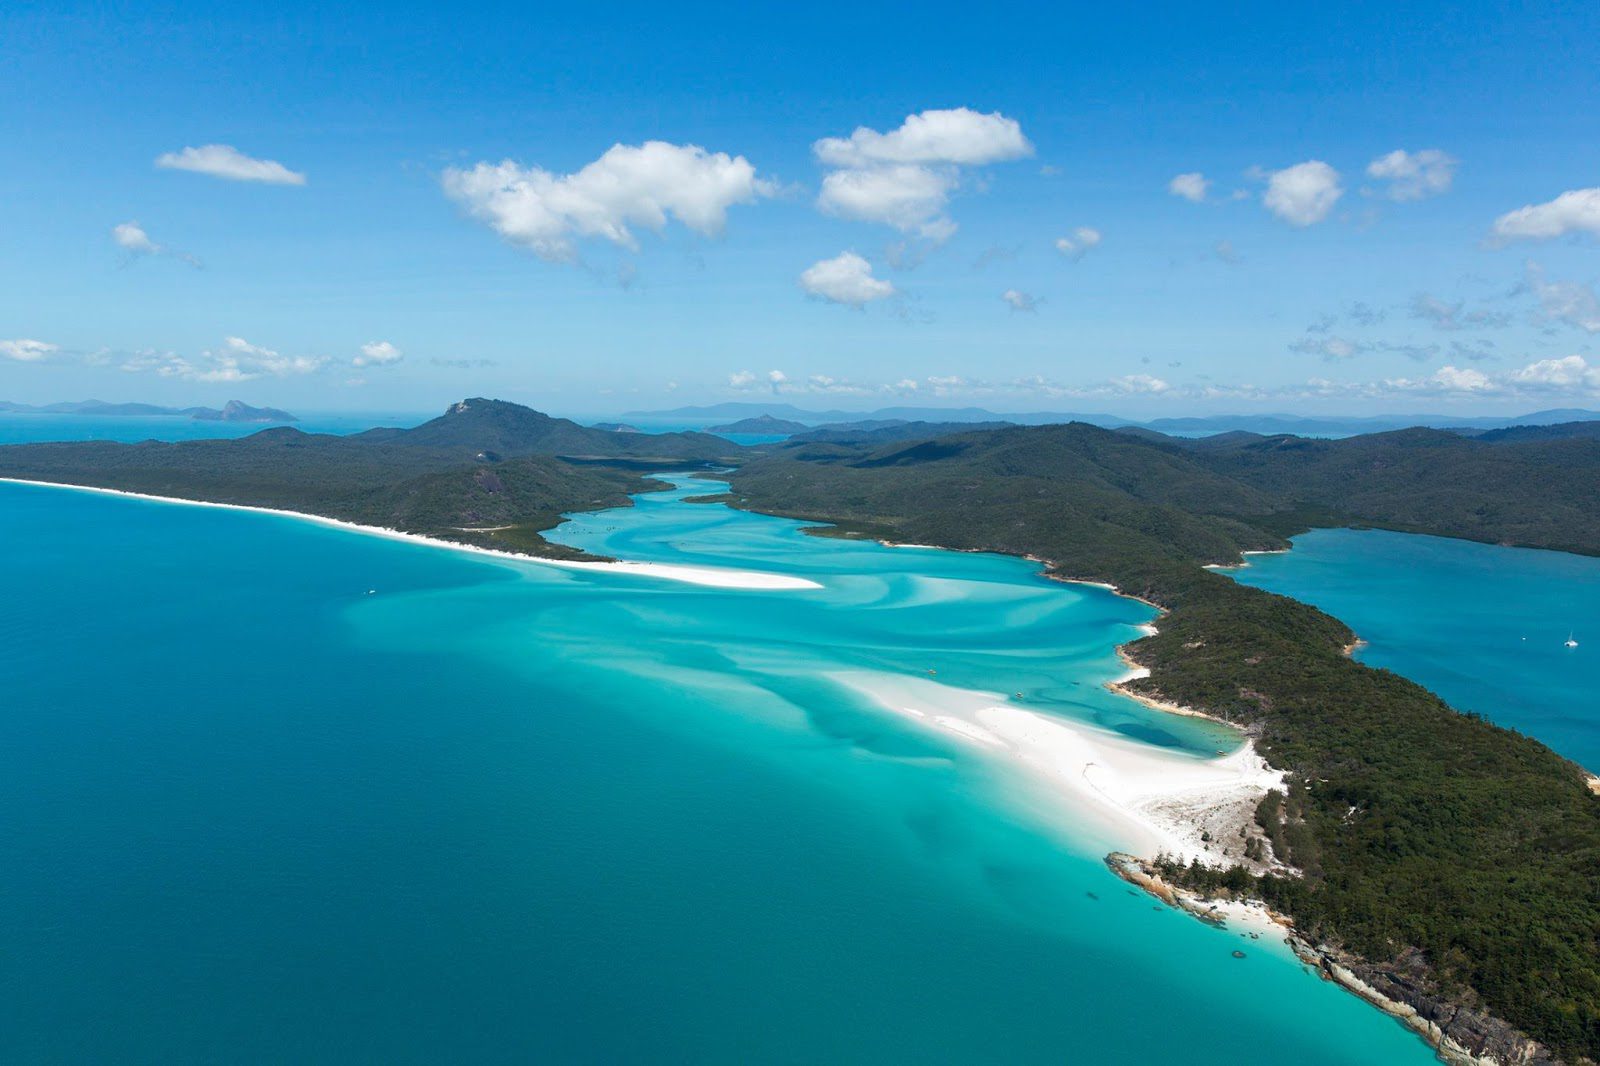 Safari to the Great Barrier Reef: How to See the Best Reefs Today, The Witsunday Island